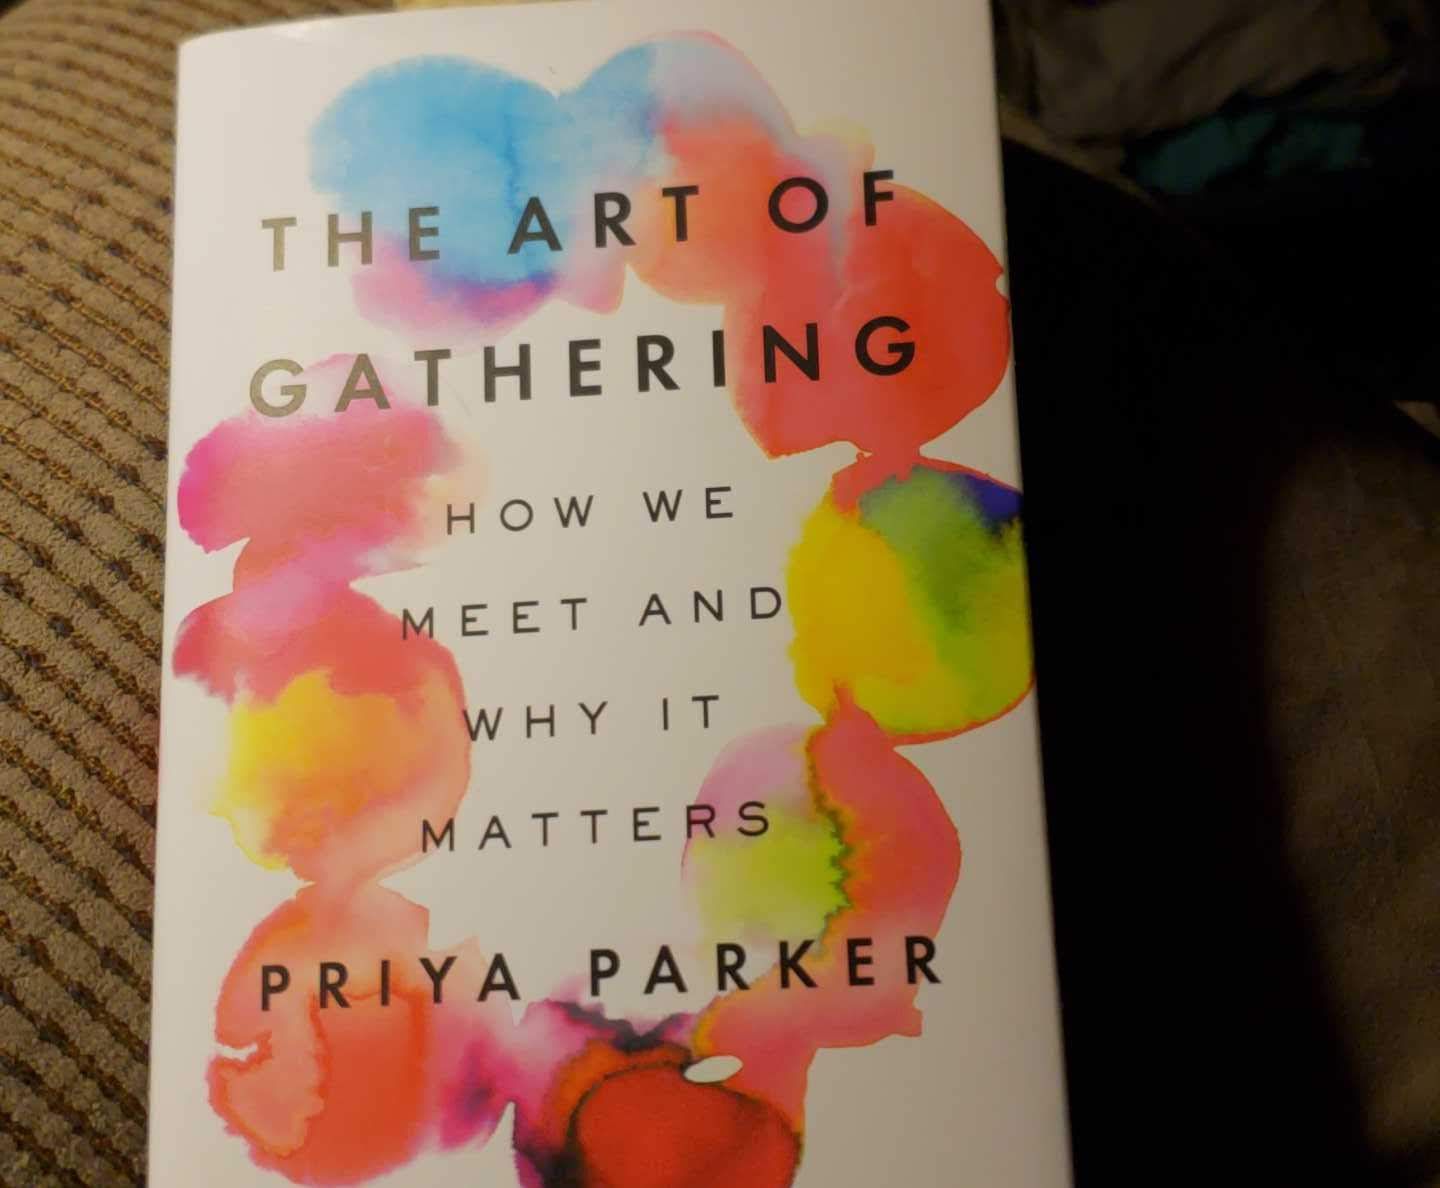 Some notes on Priya Parker's "The Art of Gathering: How and Why it Matters"